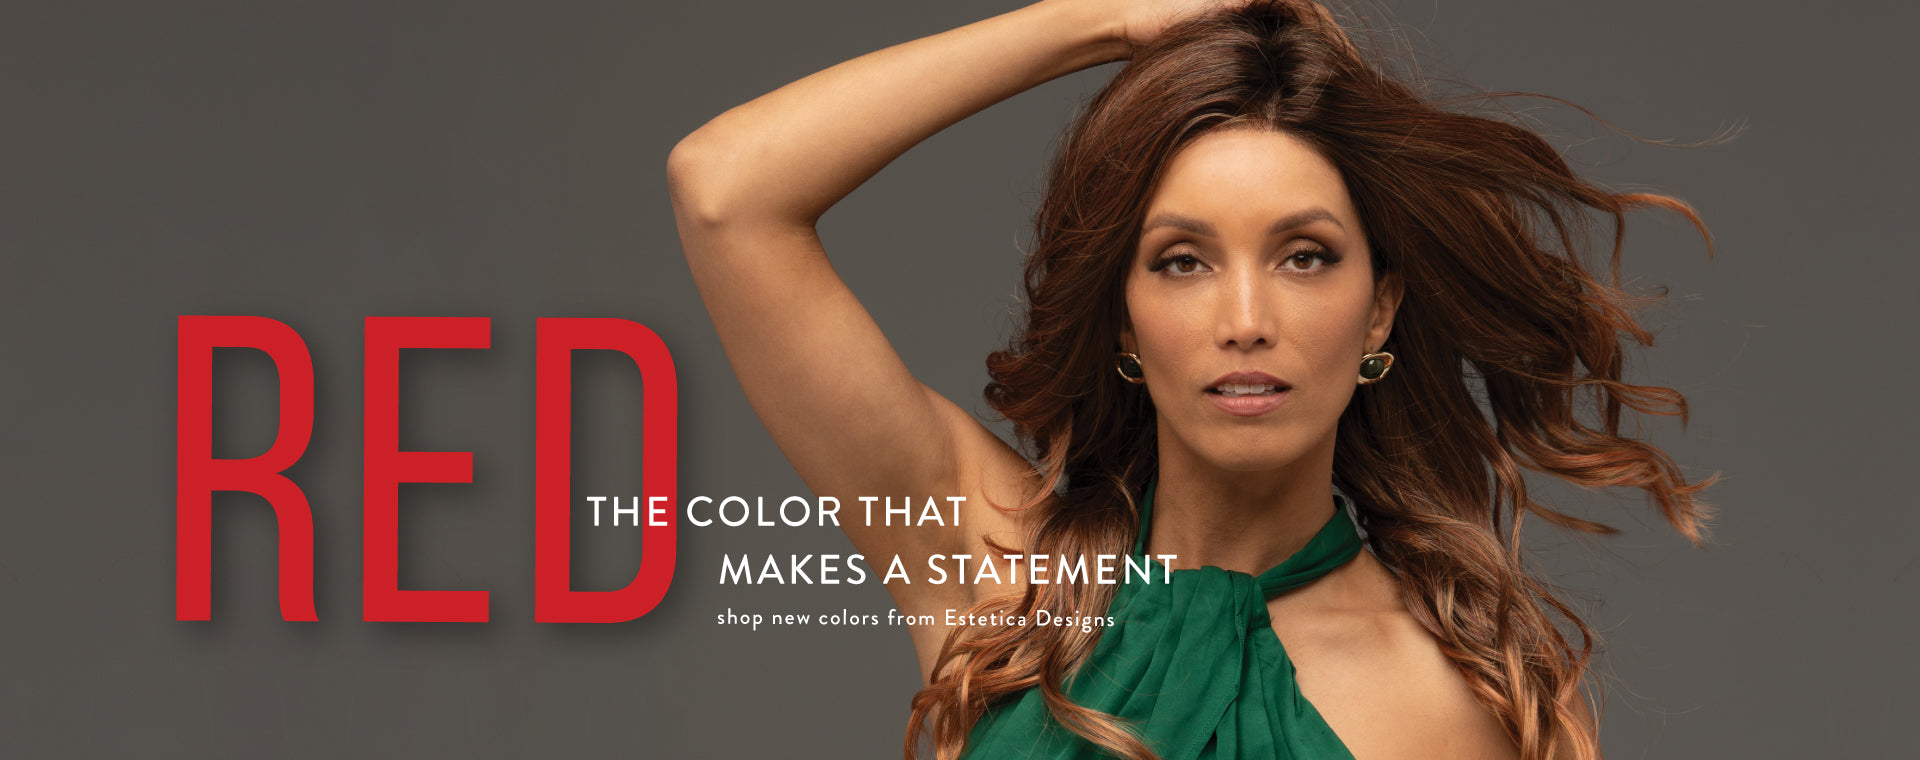 Estetica | Red - The Color That Makes A Statement